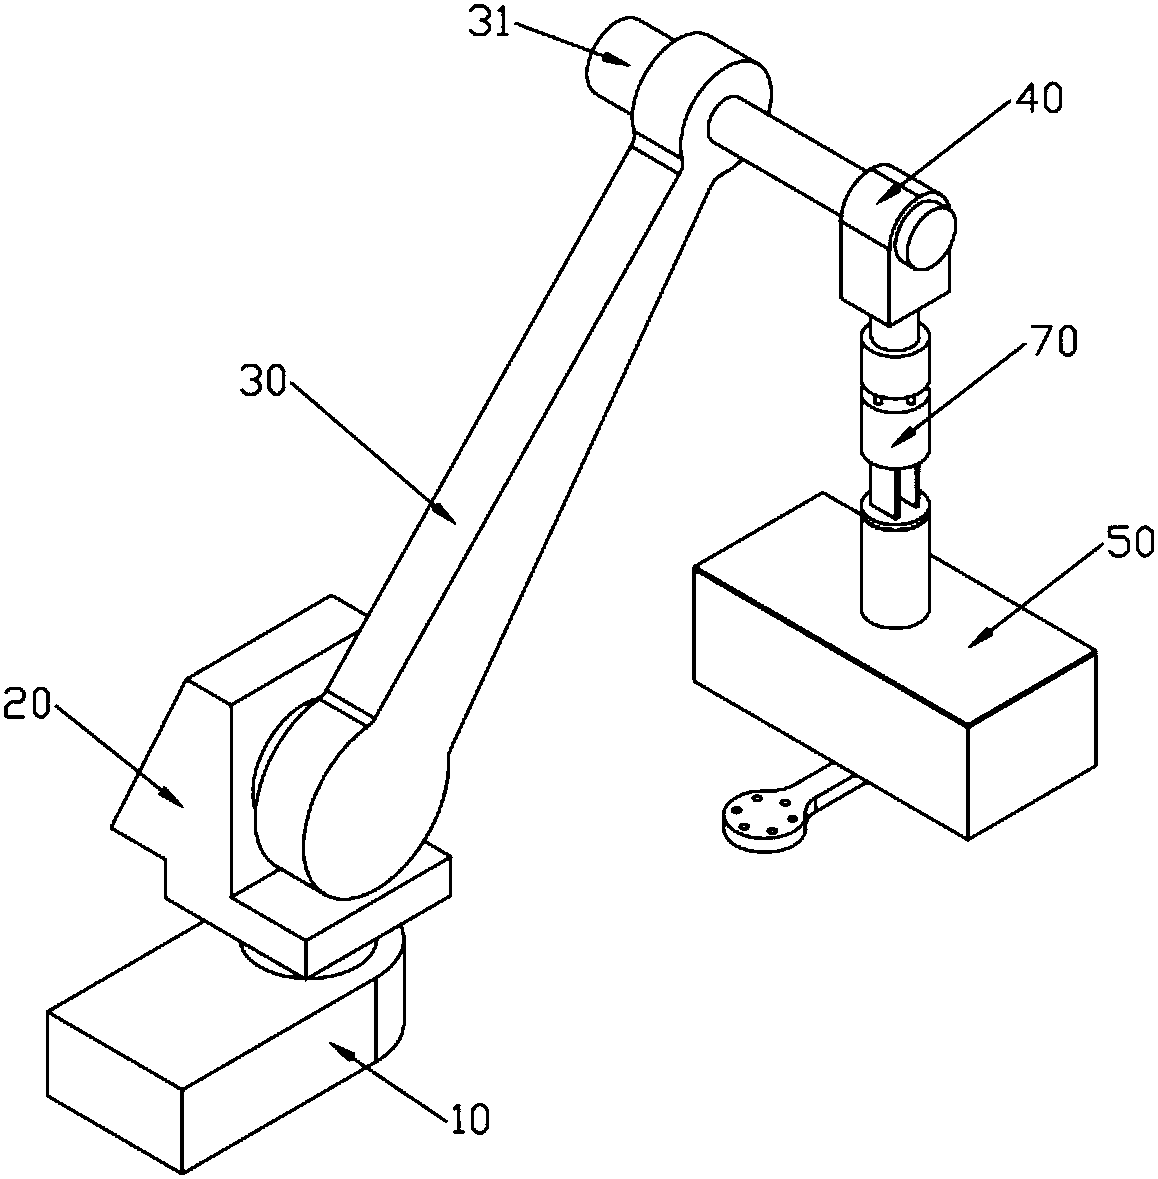 A lightweight six-axis general-purpose robot with a swingable end